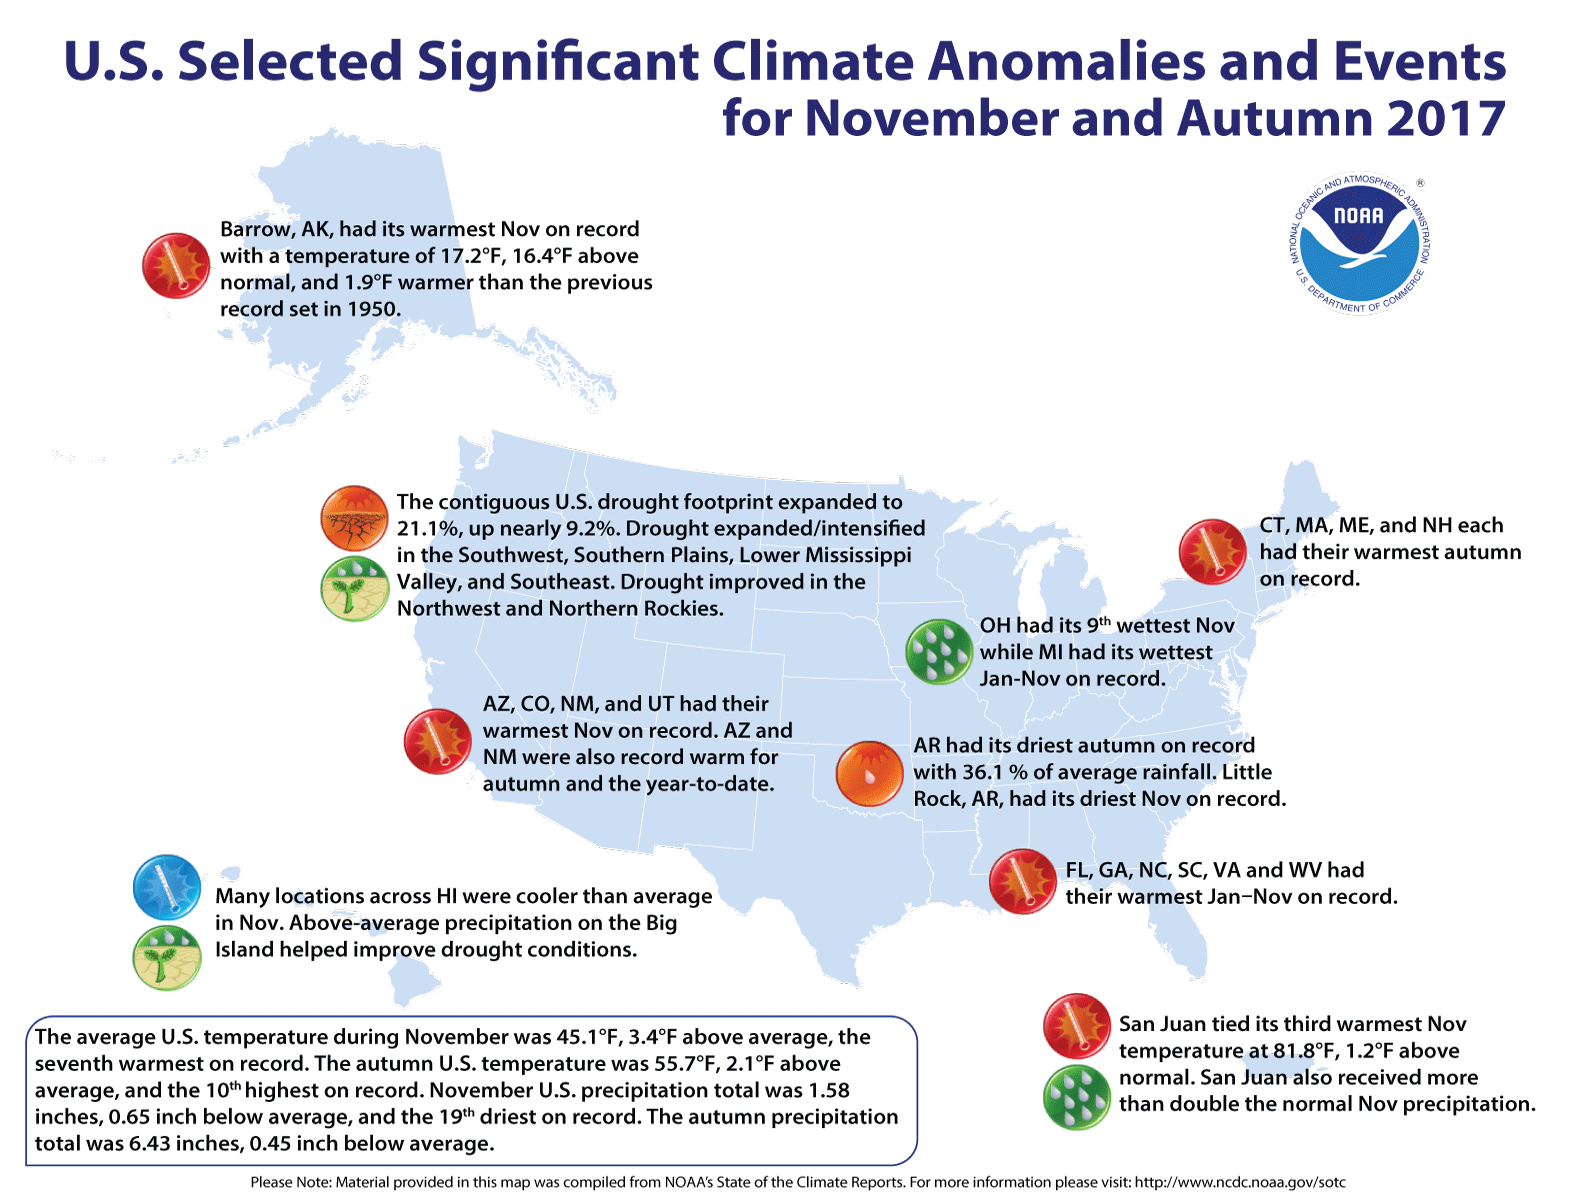 See this map of notable climate events that occurred around the U.S during November and Fall 2017.